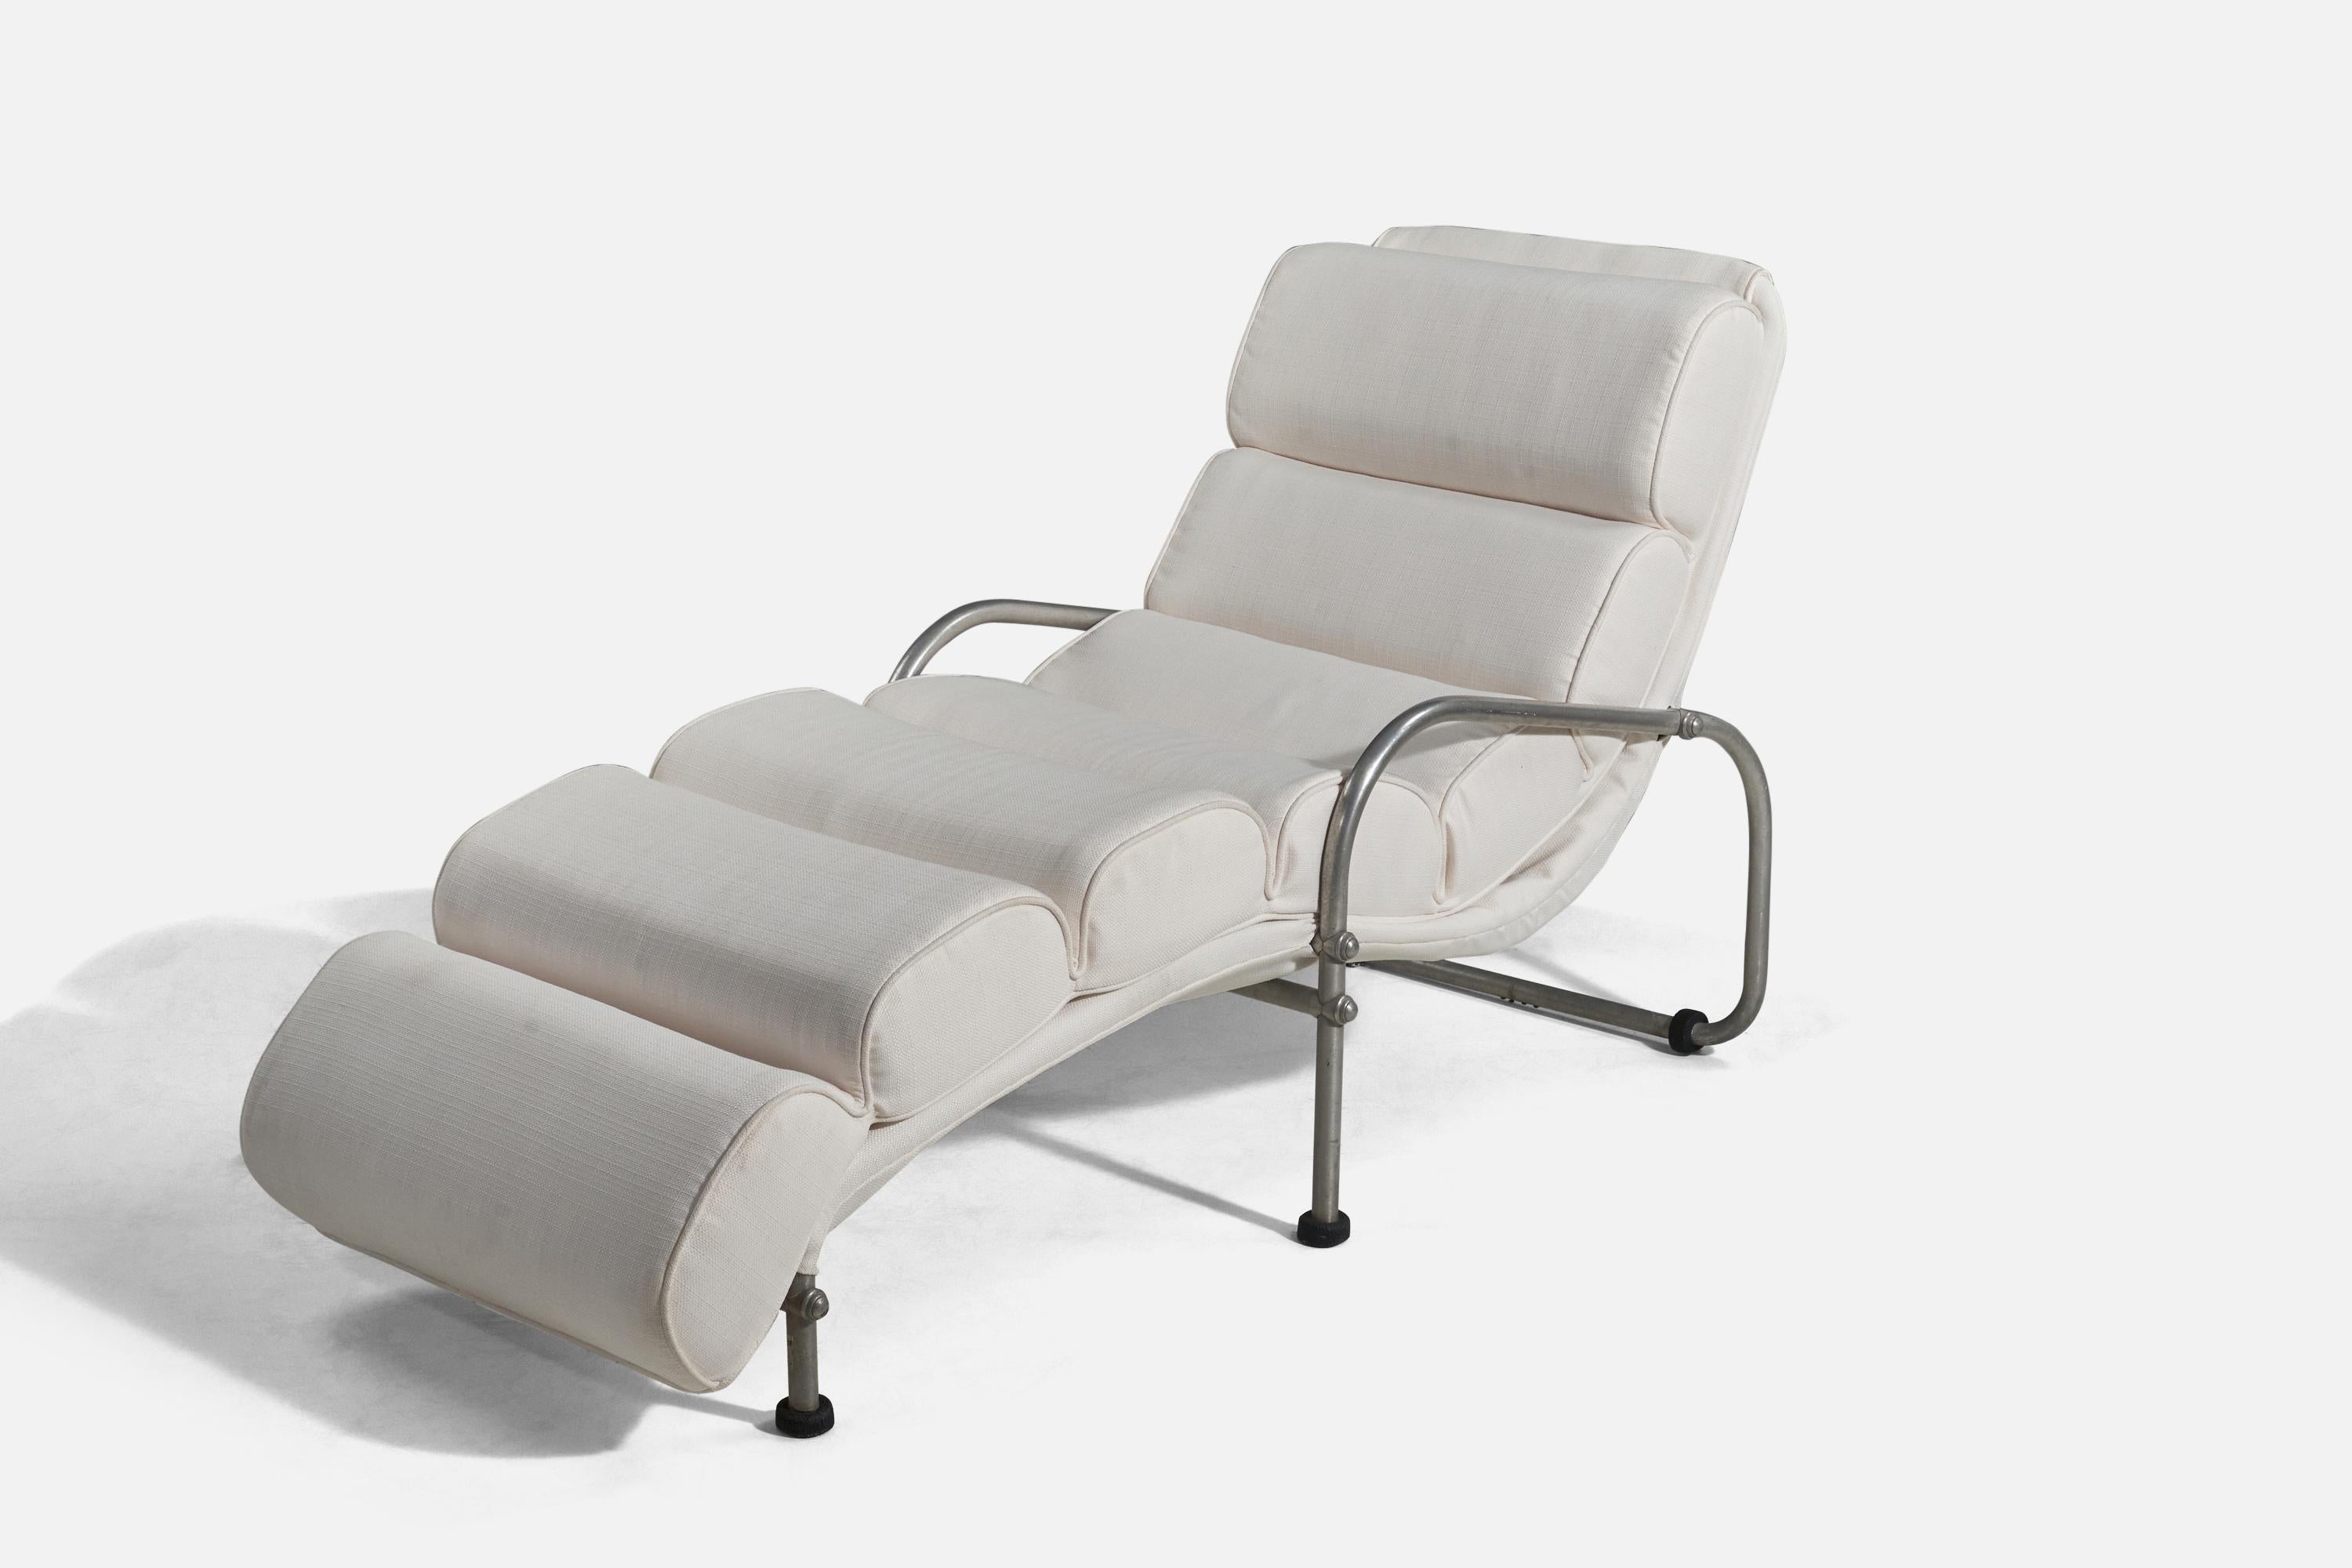 Warren McArthur, Chaise Longues, Aluminum, White Fabric, USA, c. 1930s In Good Condition For Sale In High Point, NC